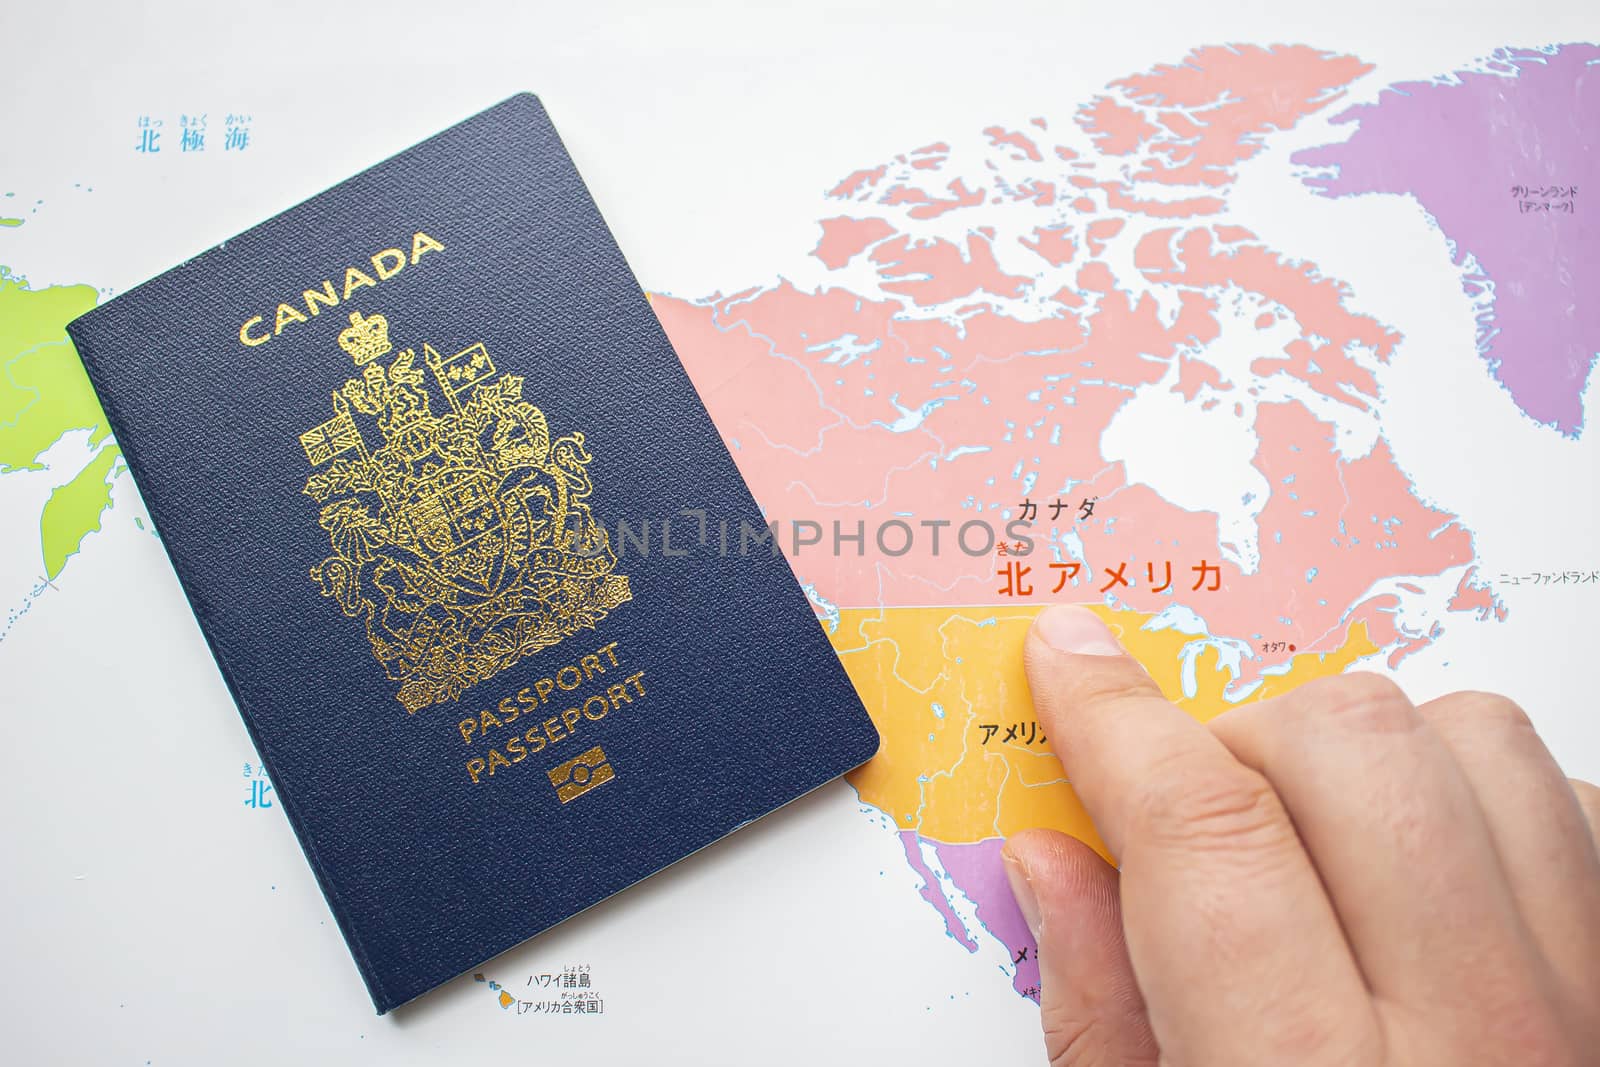 A Person's hand with a Canadian passport front cover on a map on the background by oasisamuel